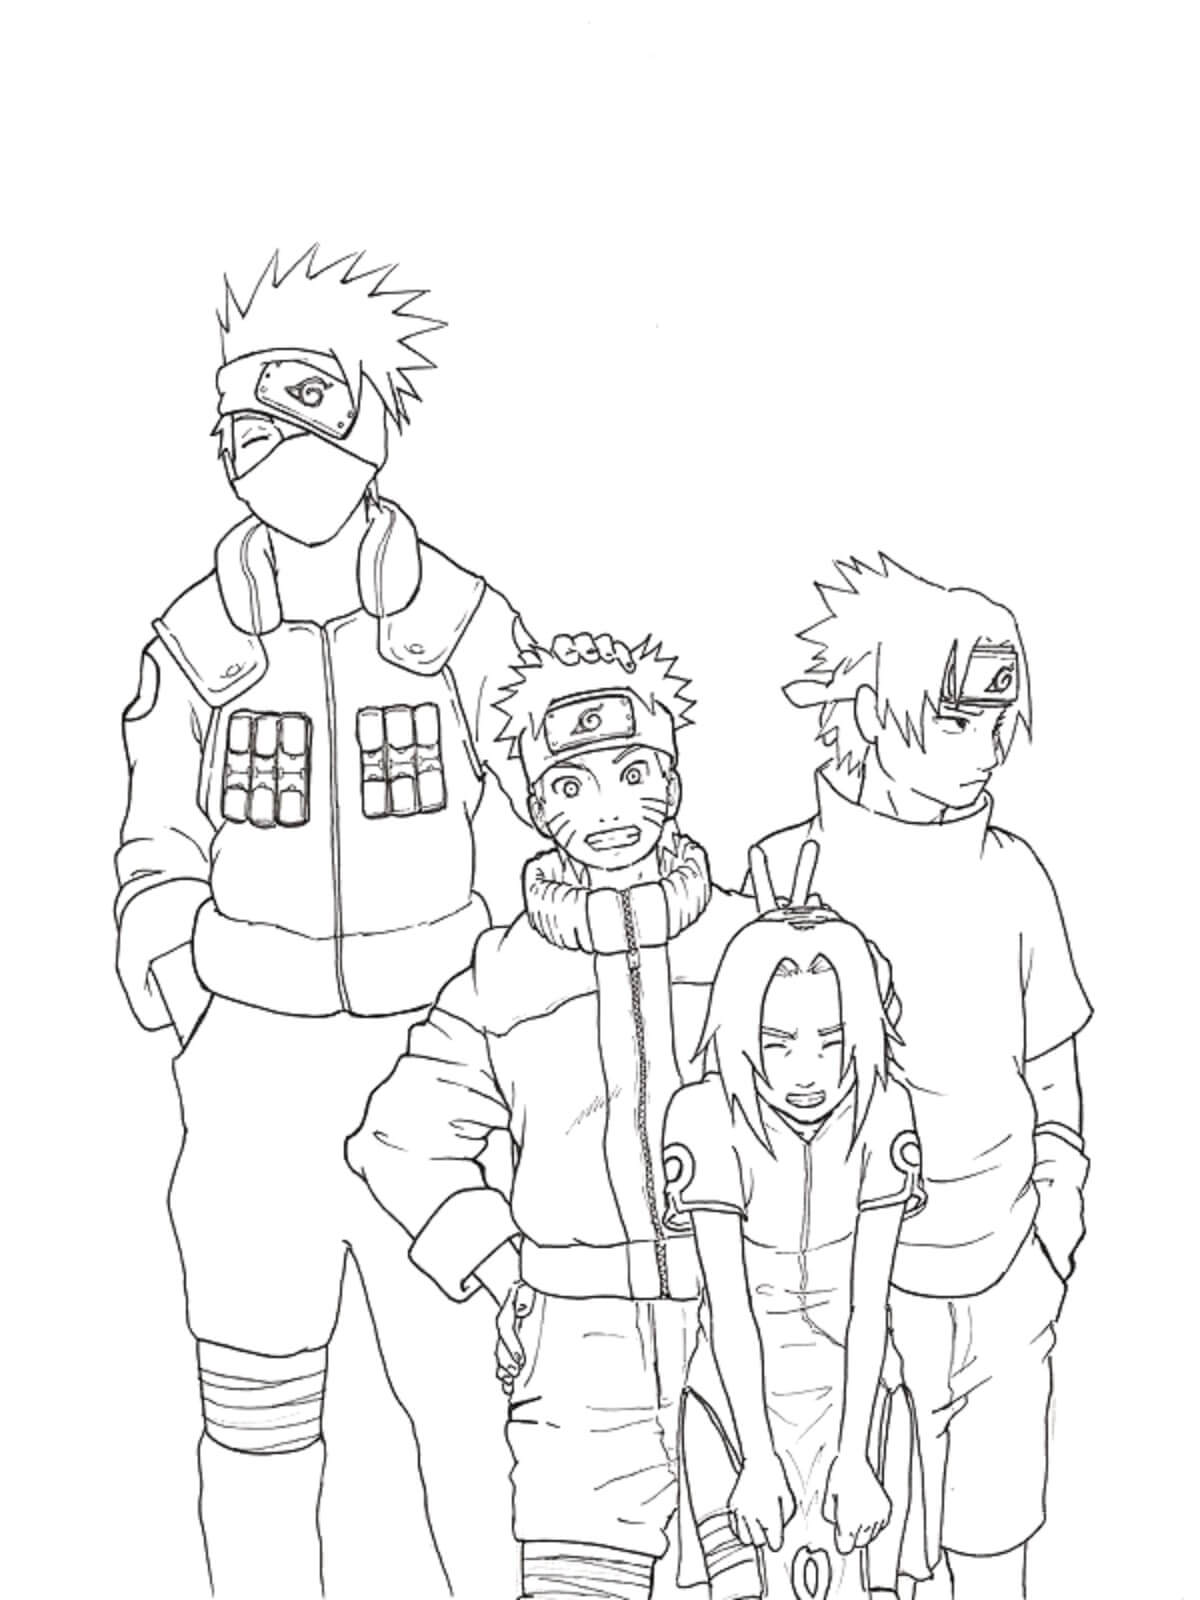 Naruto and Friends with Teacher